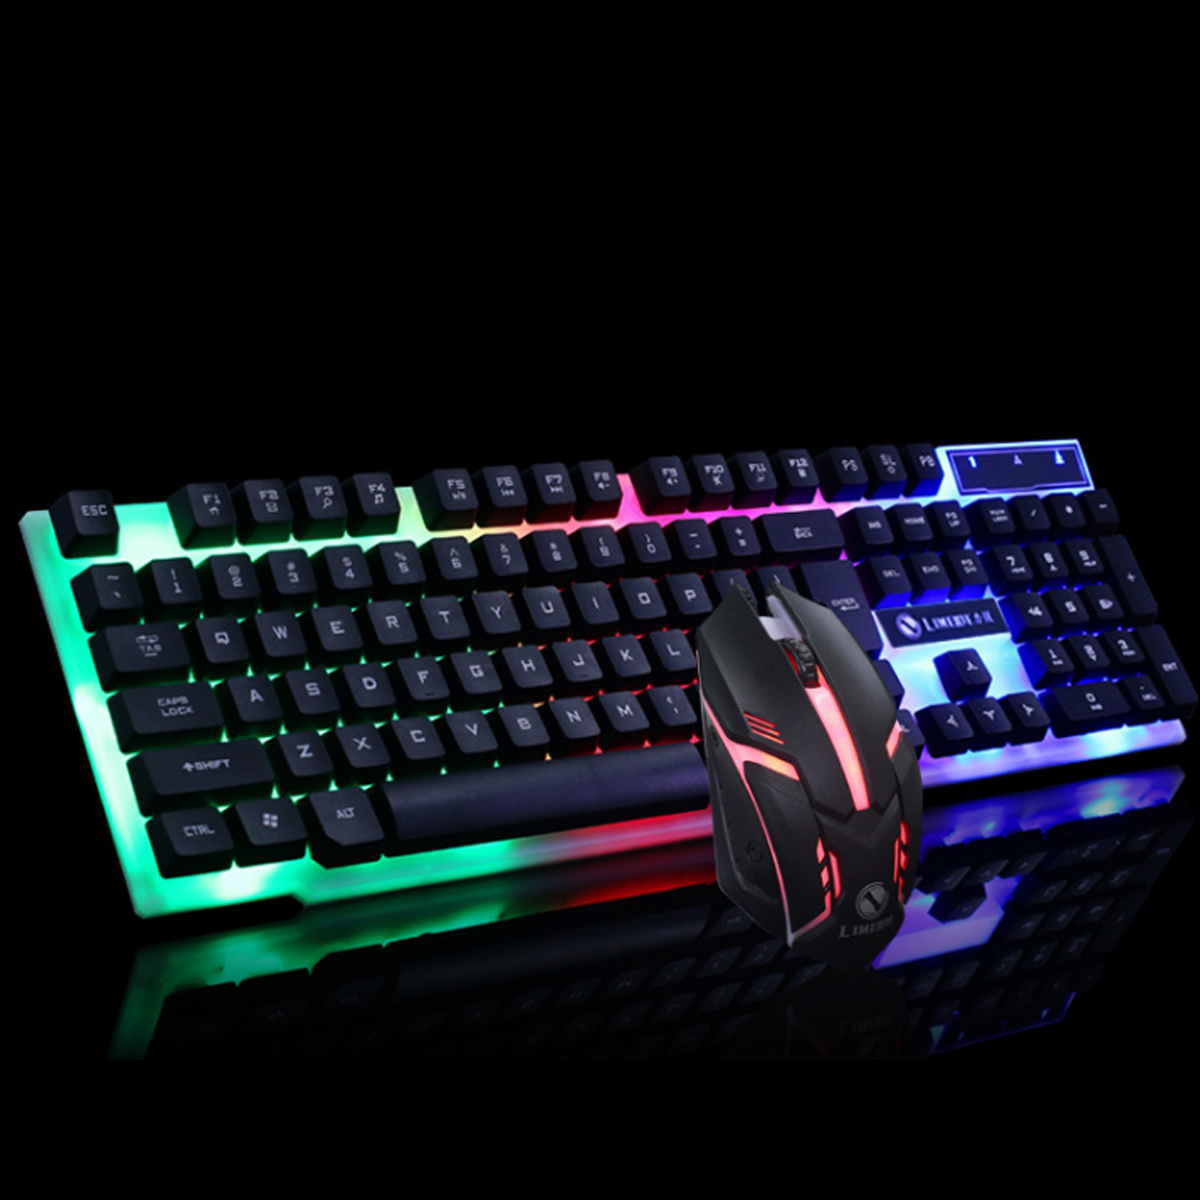 GTX300 104 Keys RGB Backlight Superthin Gaming Keyboard and 2.4GHZ 1200DPI 3 buttons USB Optical Gaming Mouse 3